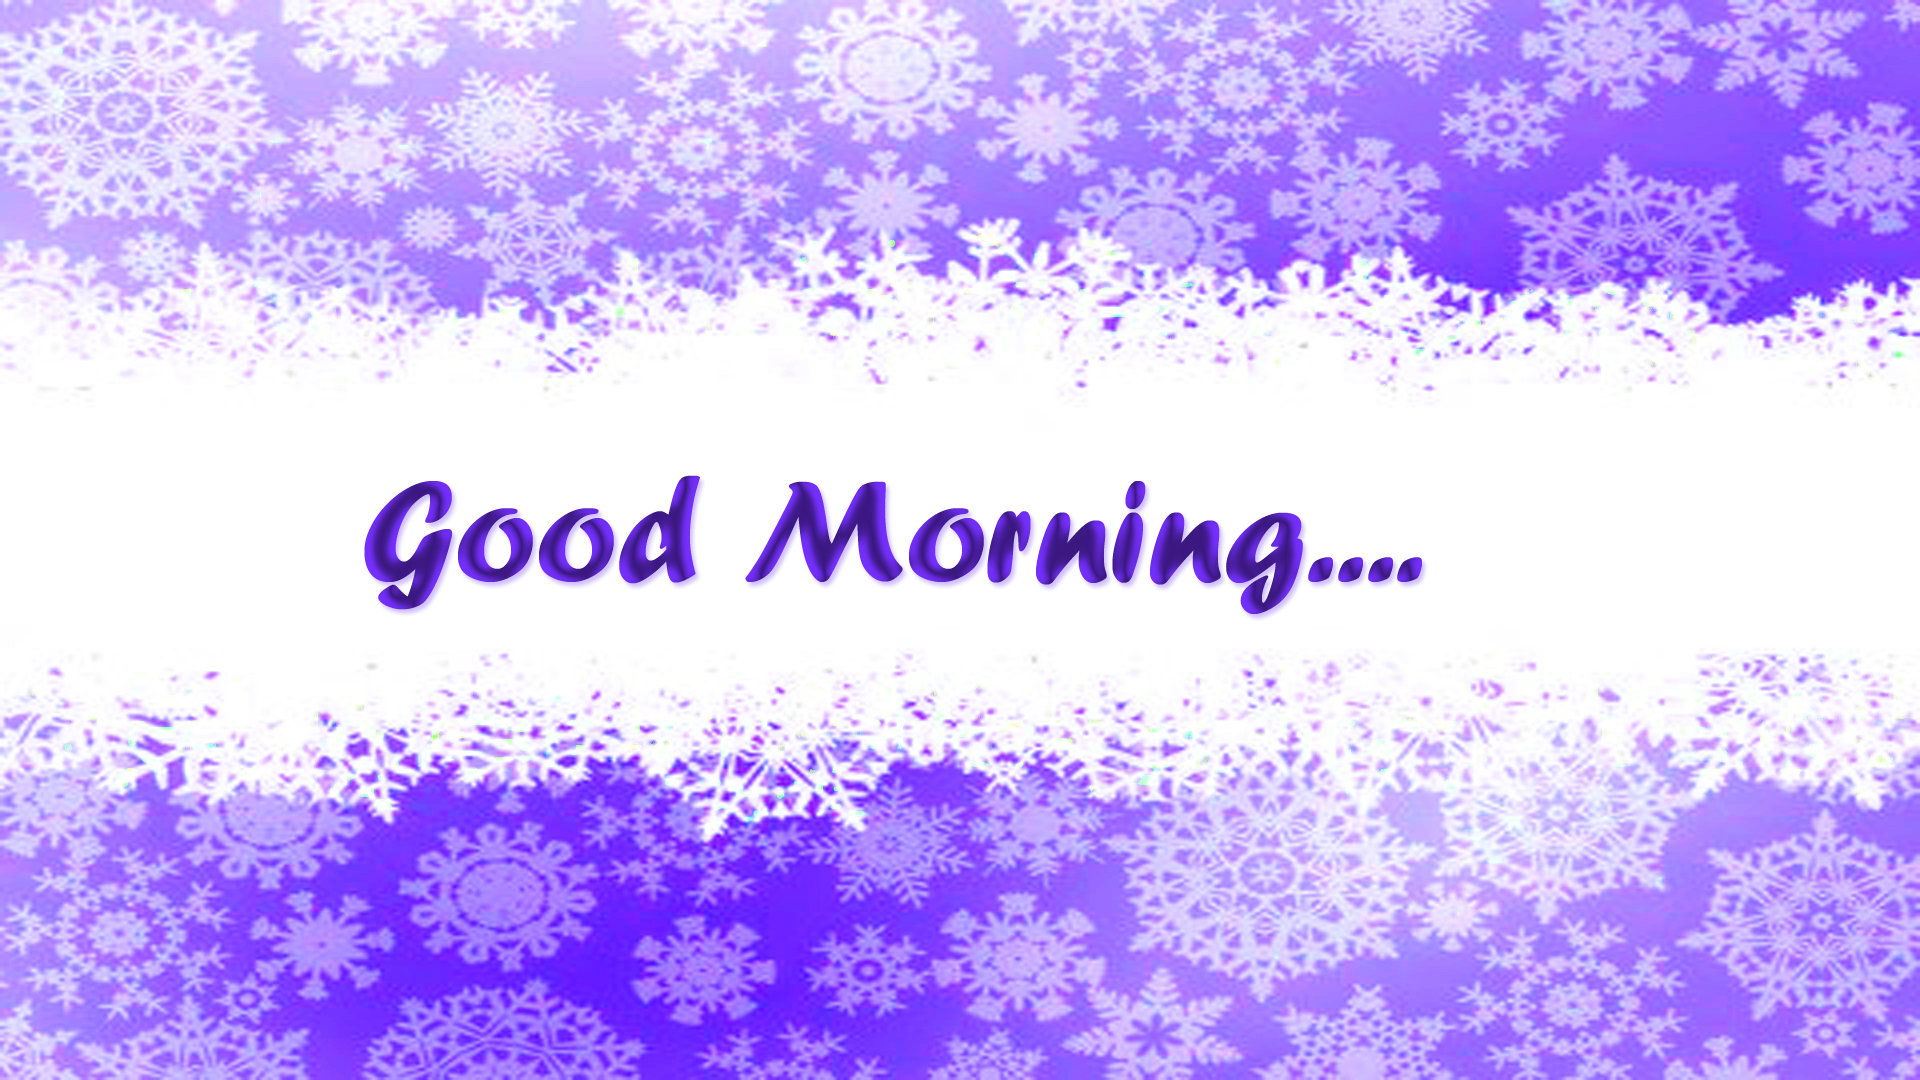 Good morning powerpoint slide templates , lettering on a purple background